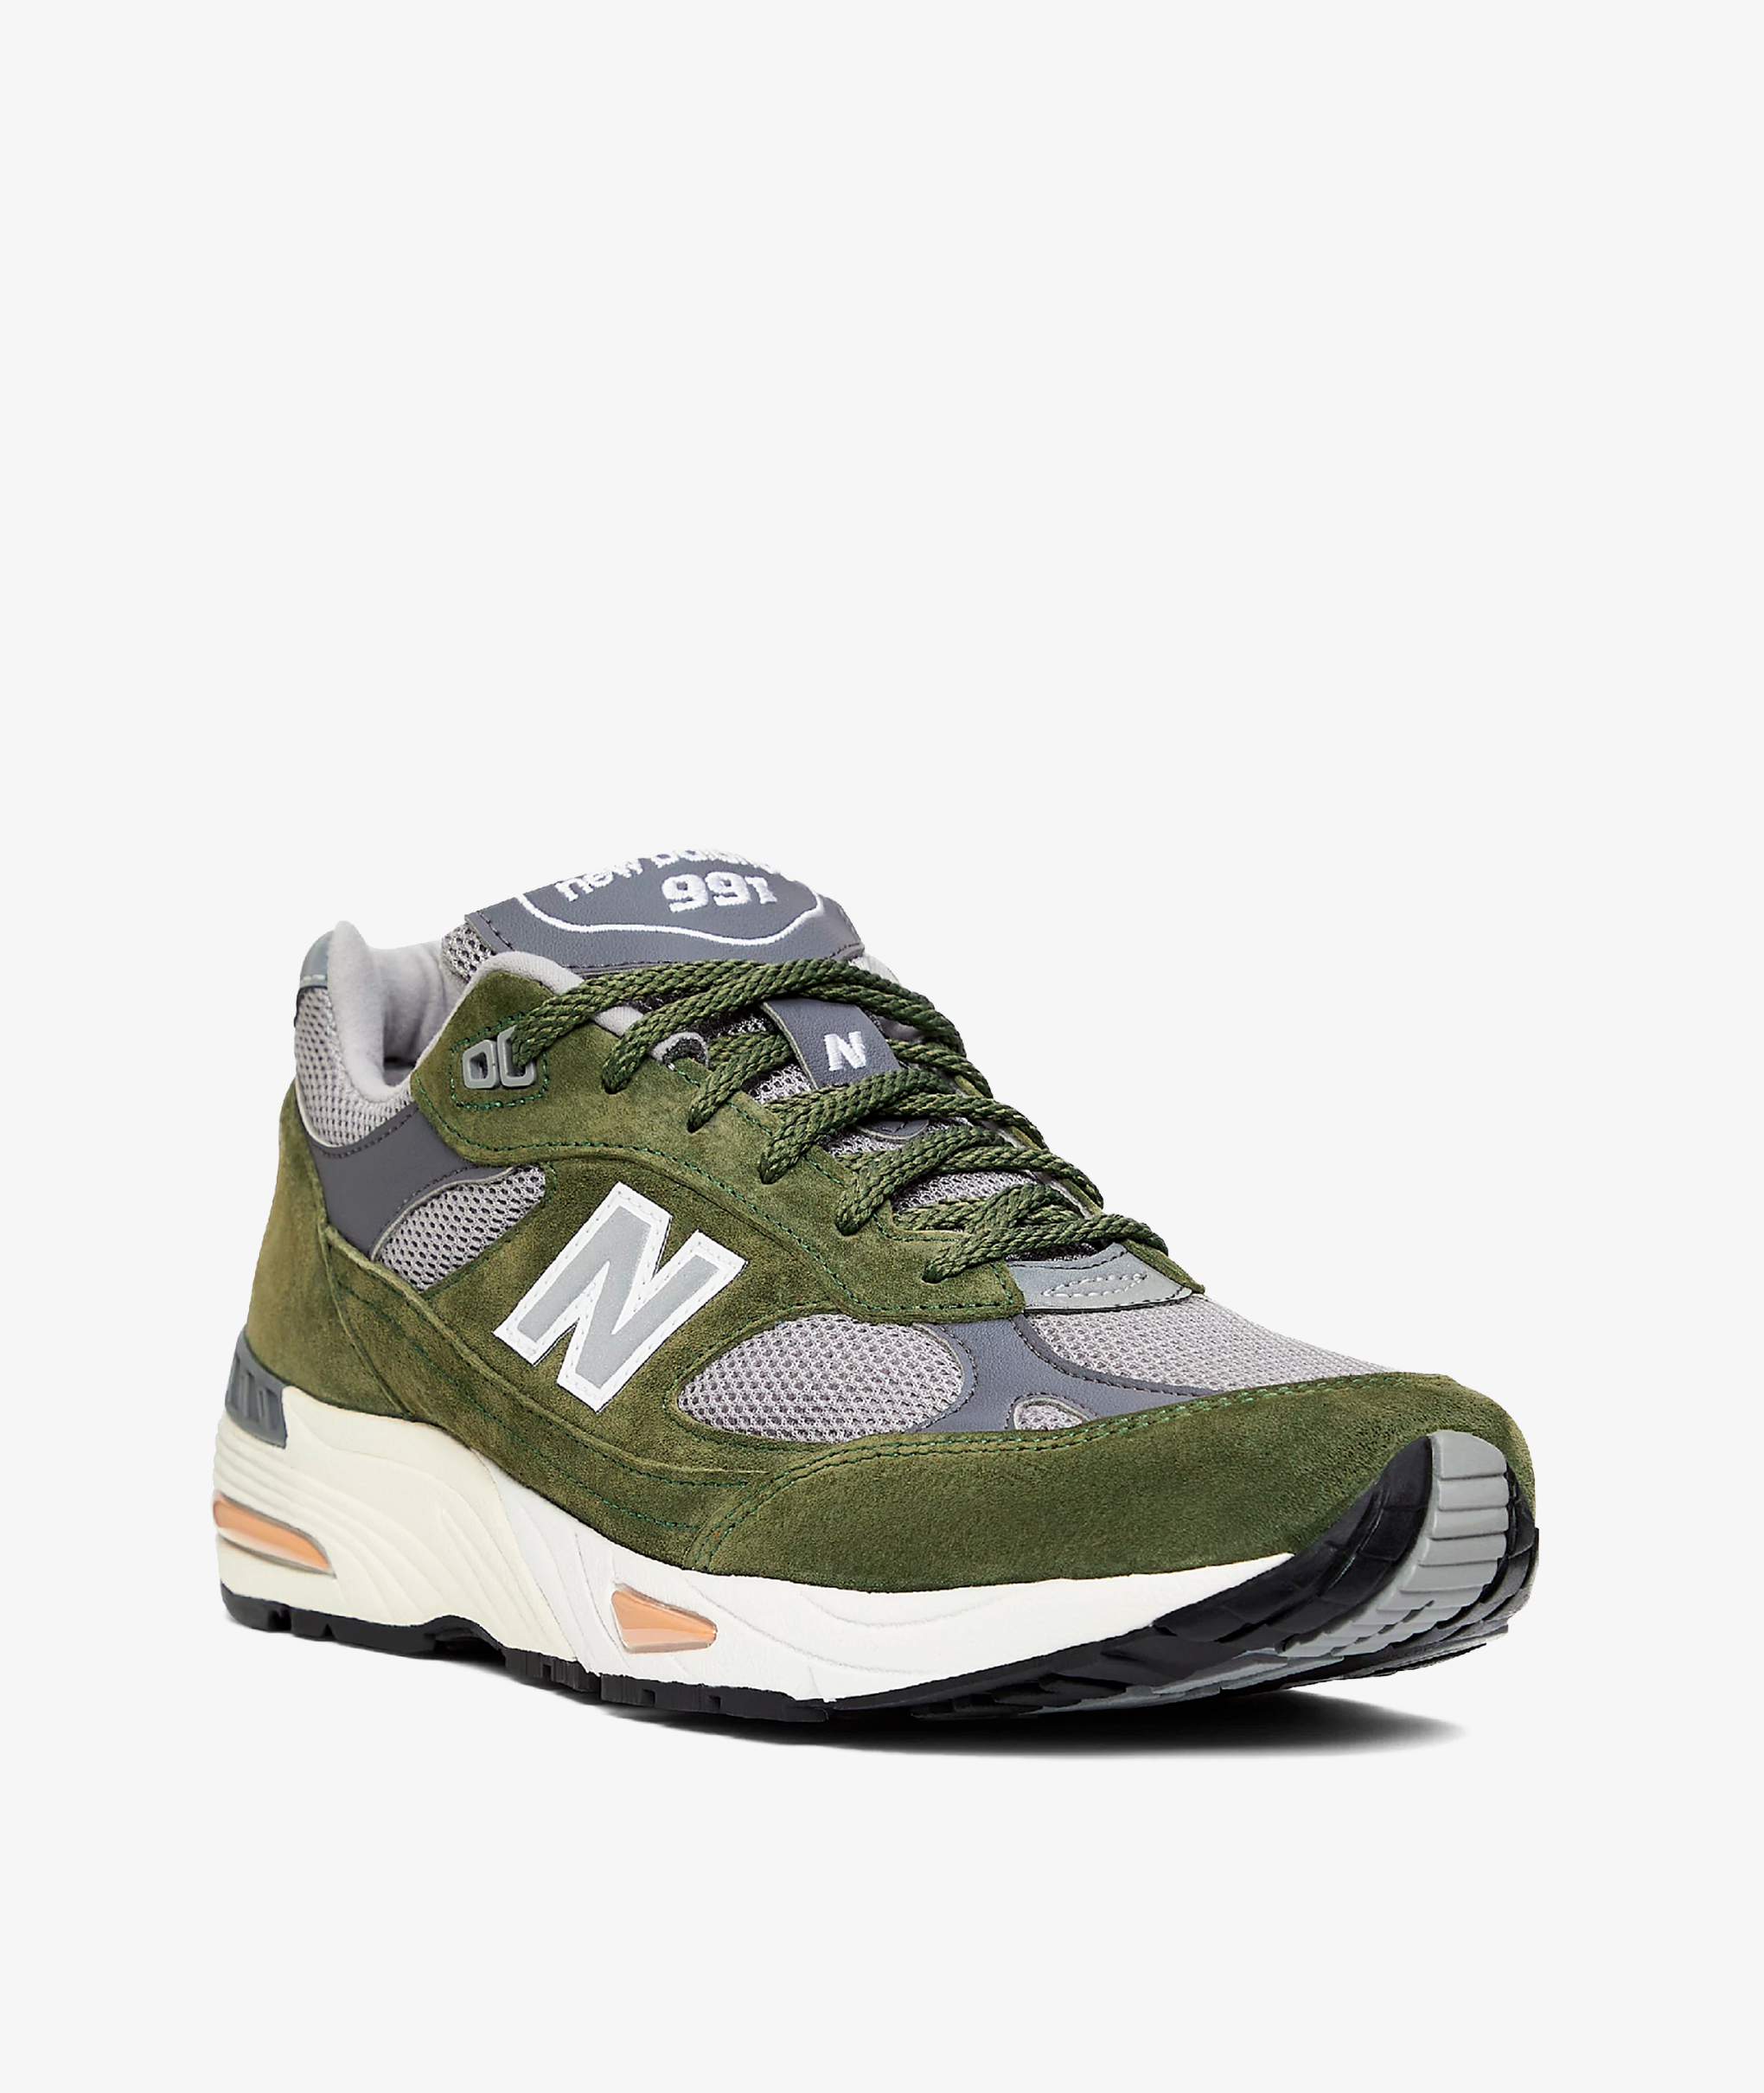 Norse Store | Shipping Worldwide - New Balance M991GGT - Green / Grey